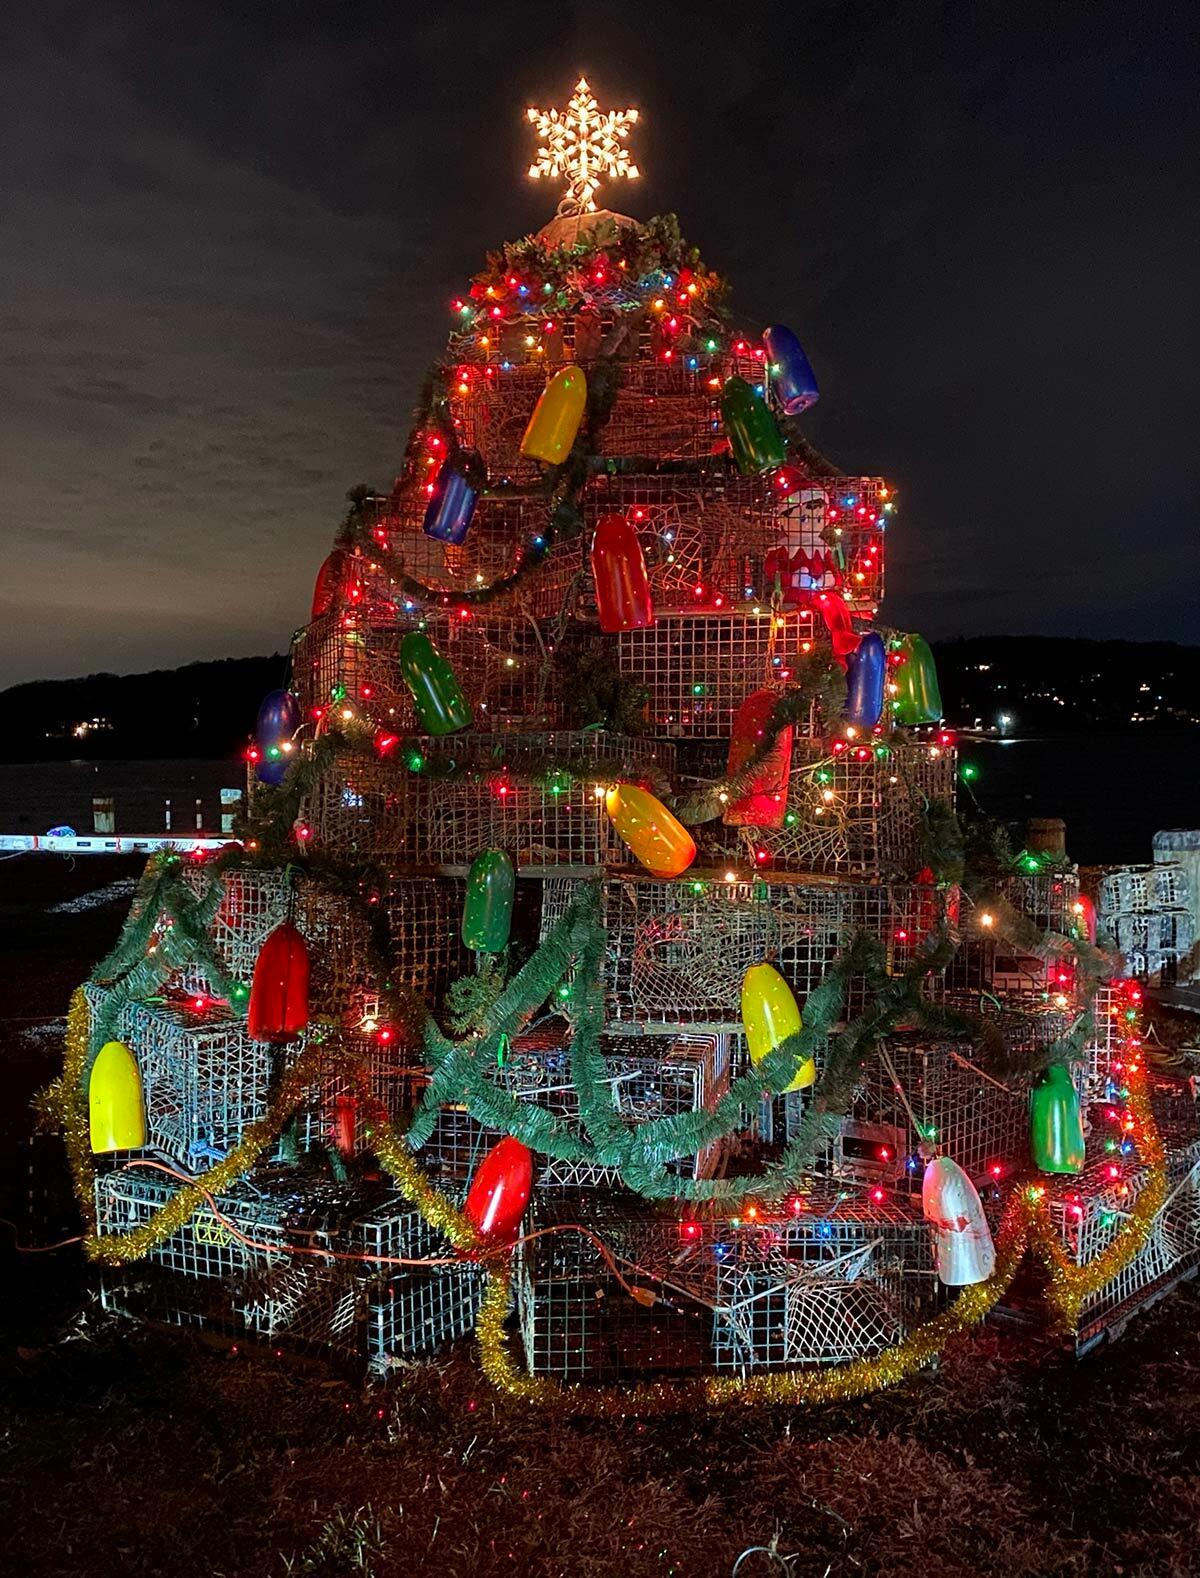 The much-lauded lobster trap tree at night. Photograph by Lauren Pluchino.